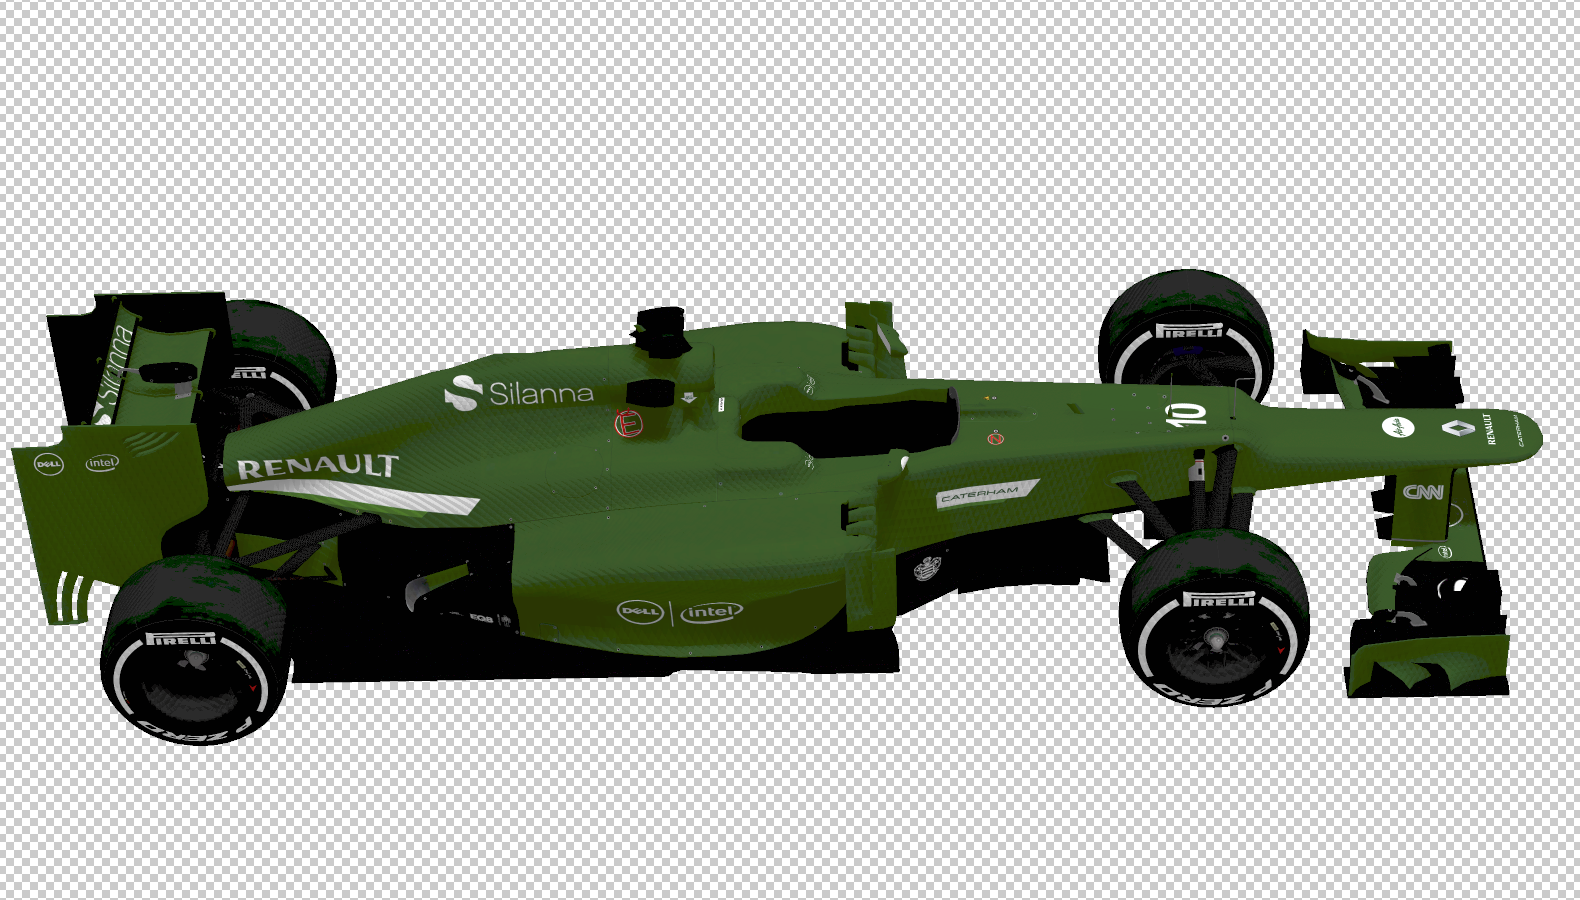 Caterham CT05 Silverstone.PNG